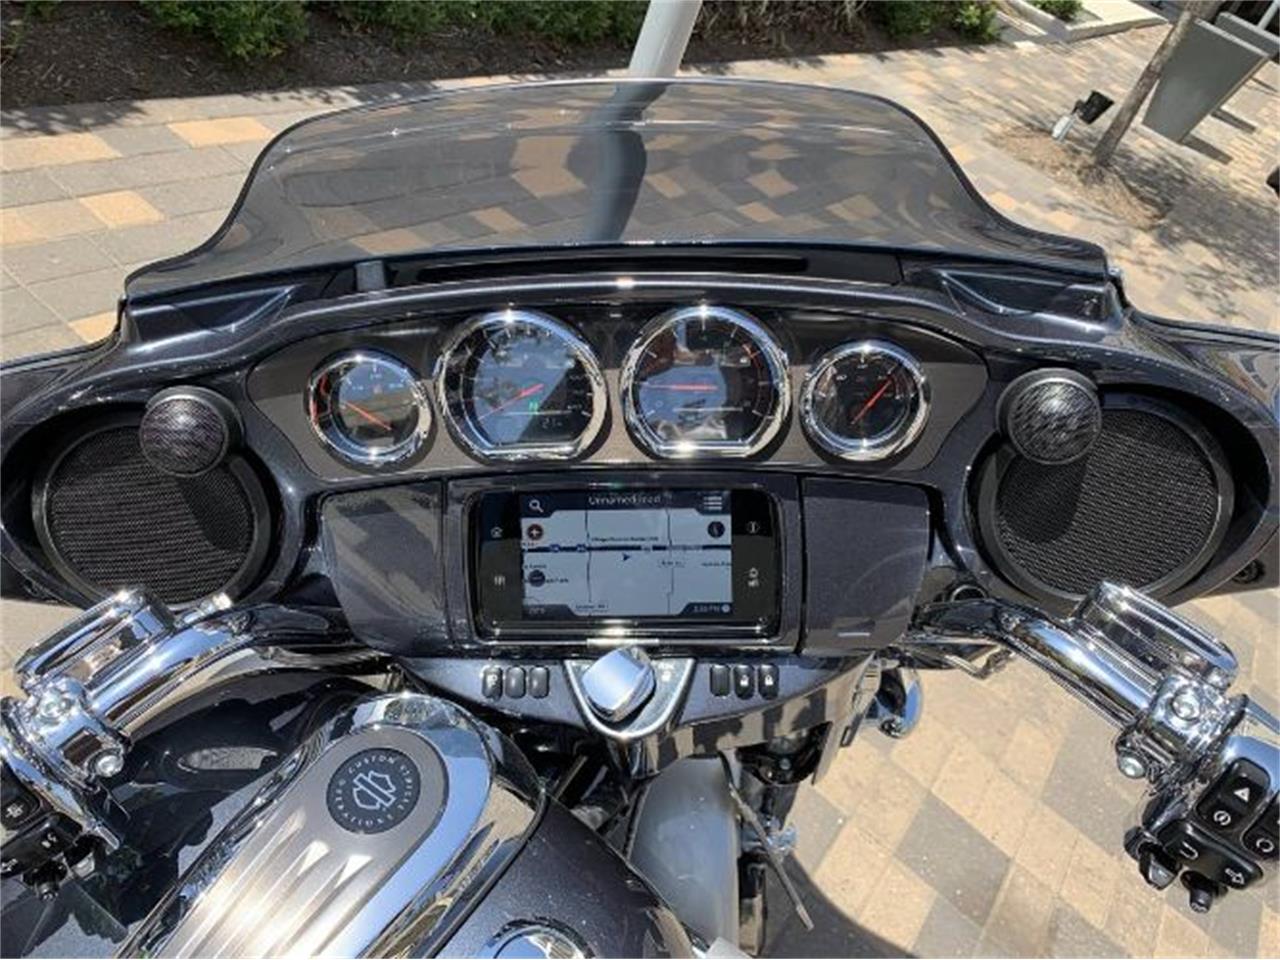 2019 Harley-Davidson Motorcycle for sale in Cadillac, MI – photo 21